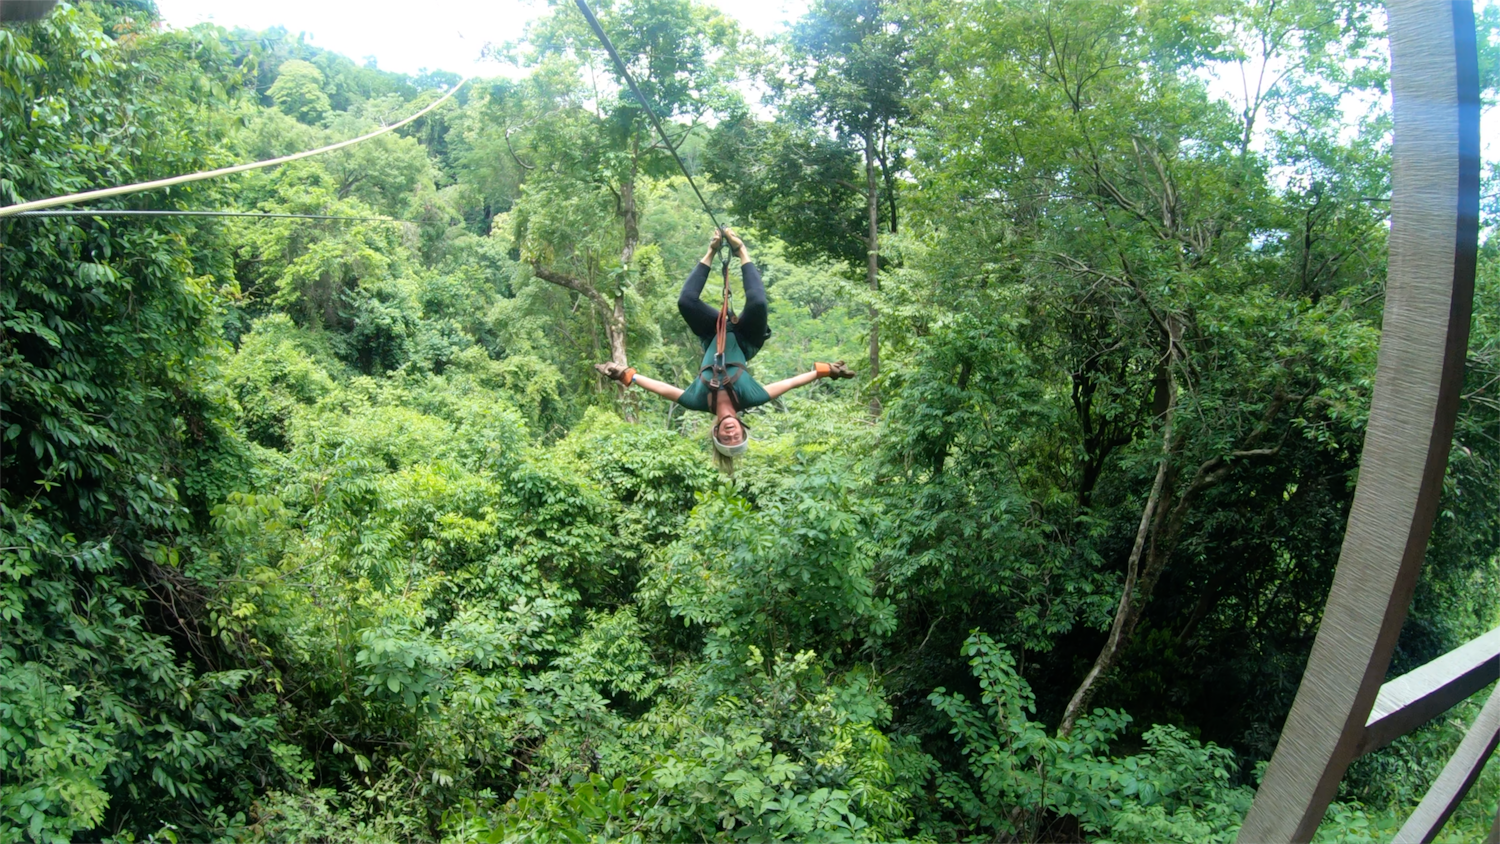 A zipline adventure through the jungle is one of the best Costa Rica tours.